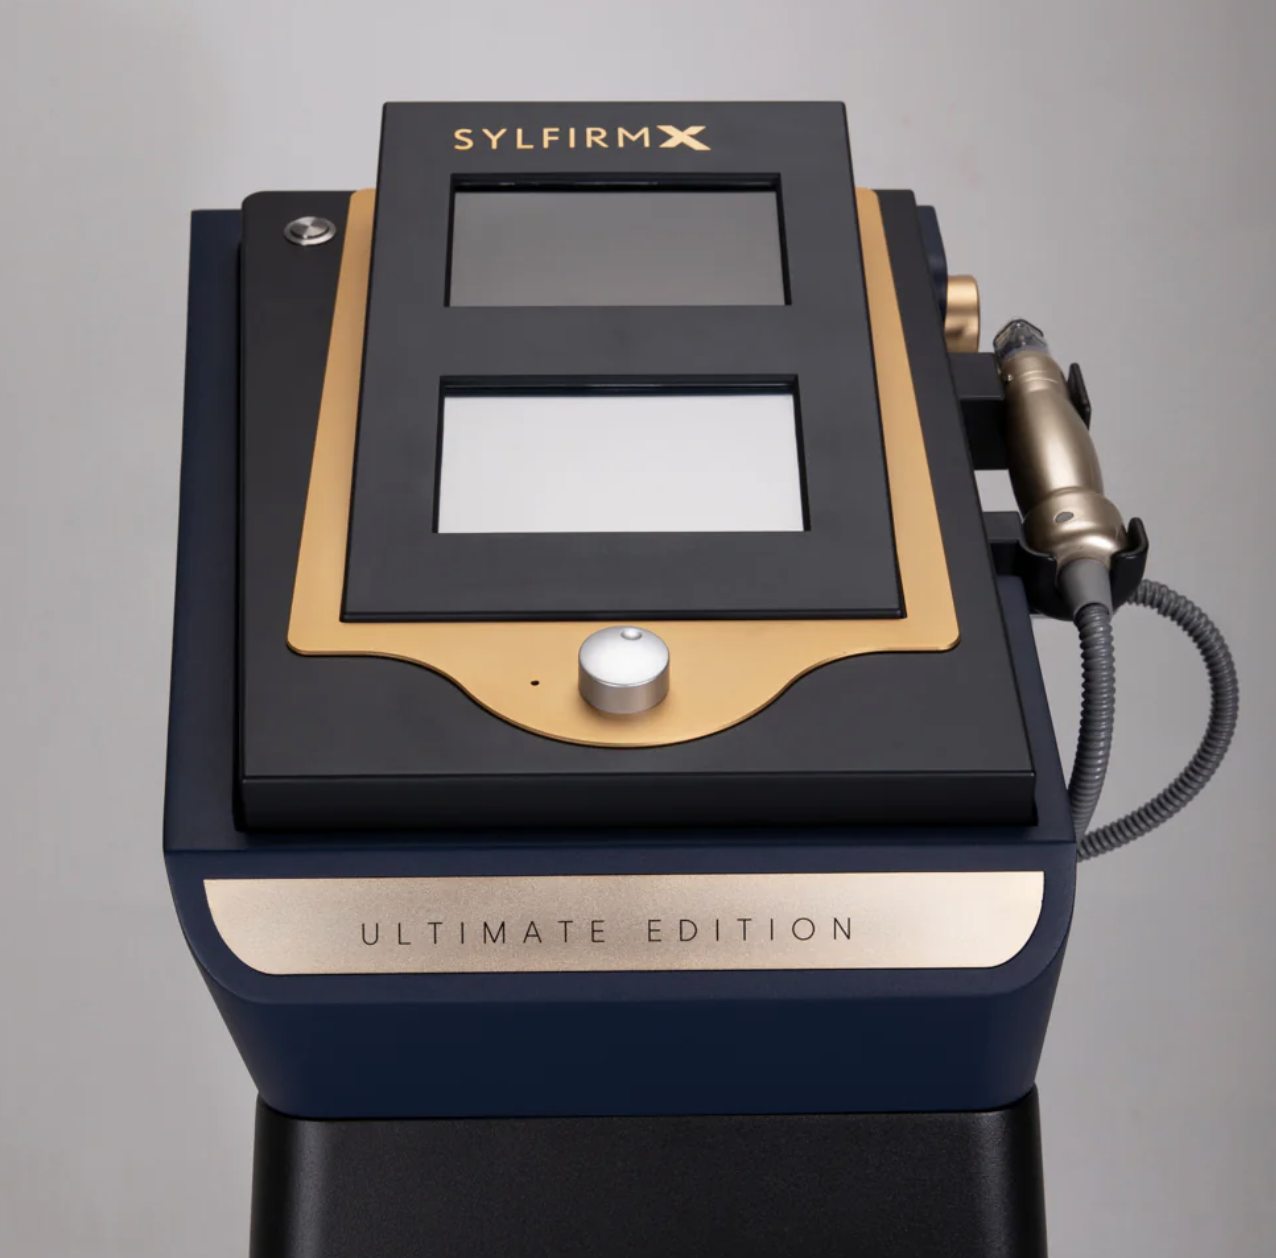 Sylfirm x radio frequency microneedling device